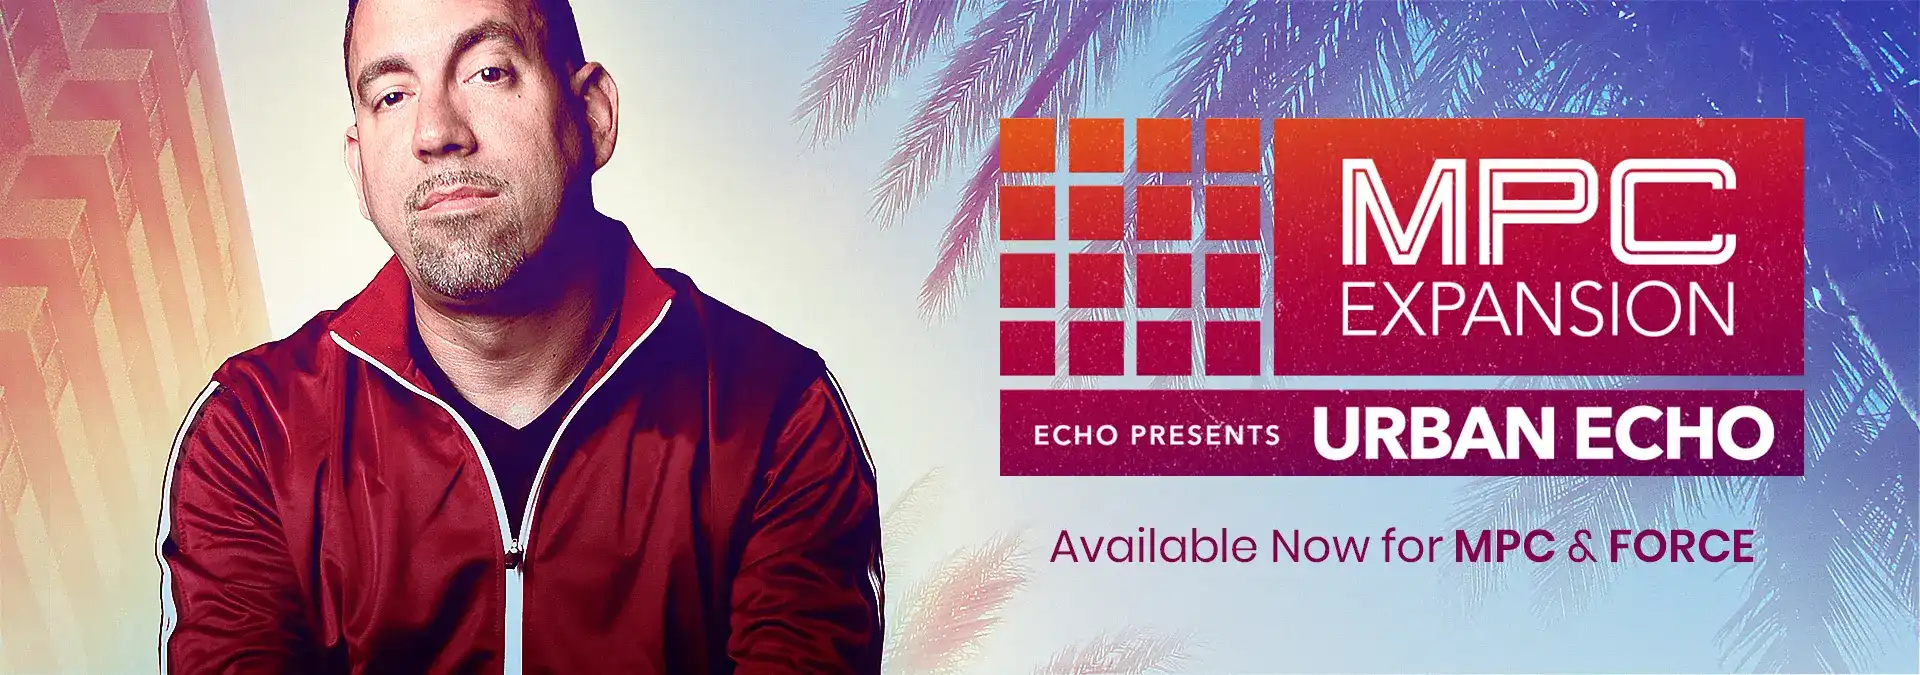 mpc expansion echo presents urban echo available now for mpc & force